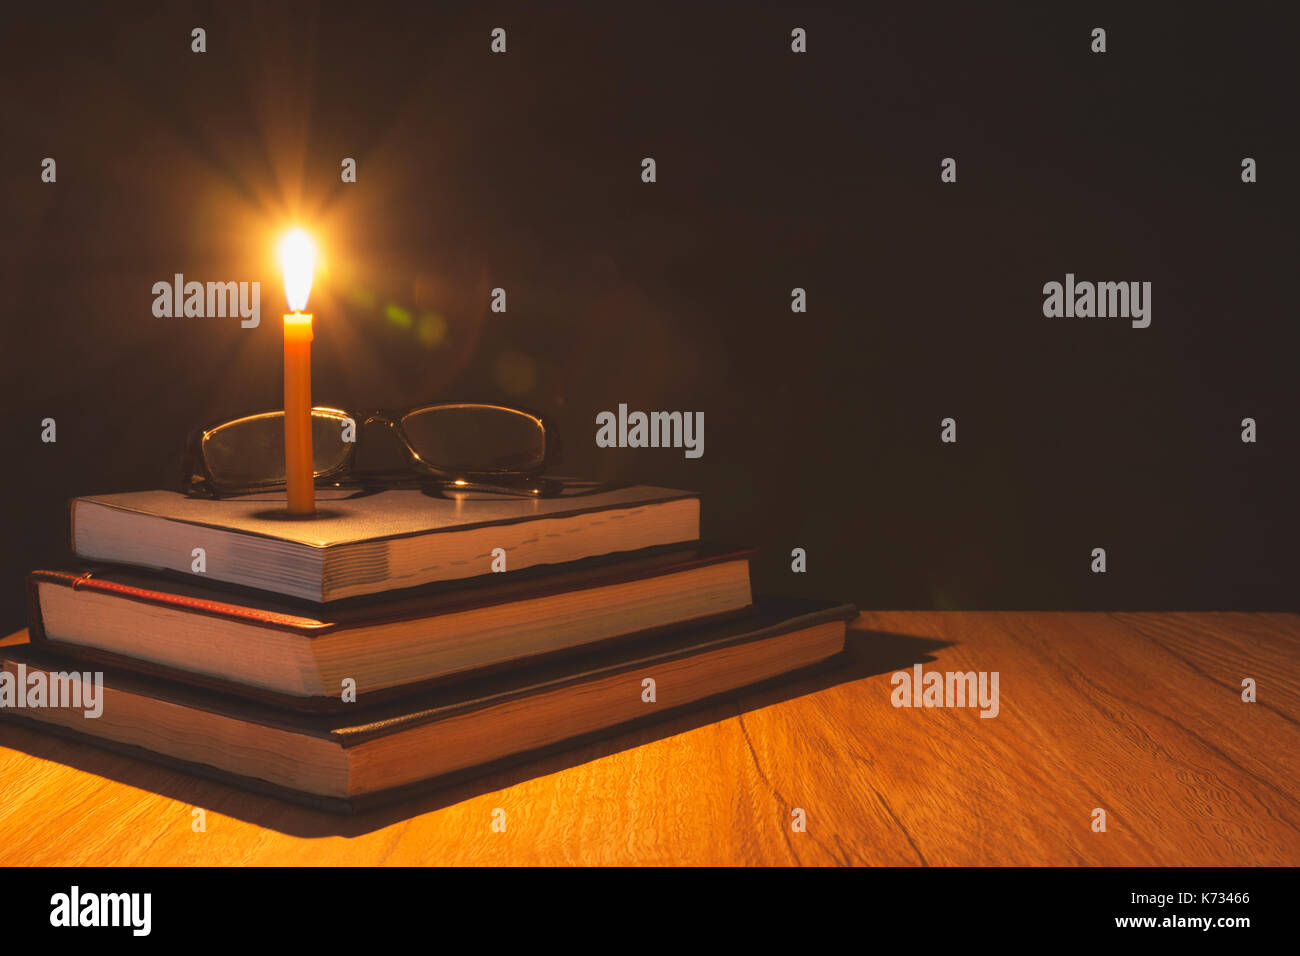 Close-up of burning candle with pile of old book on wooden table. Education concept. Stock Photo